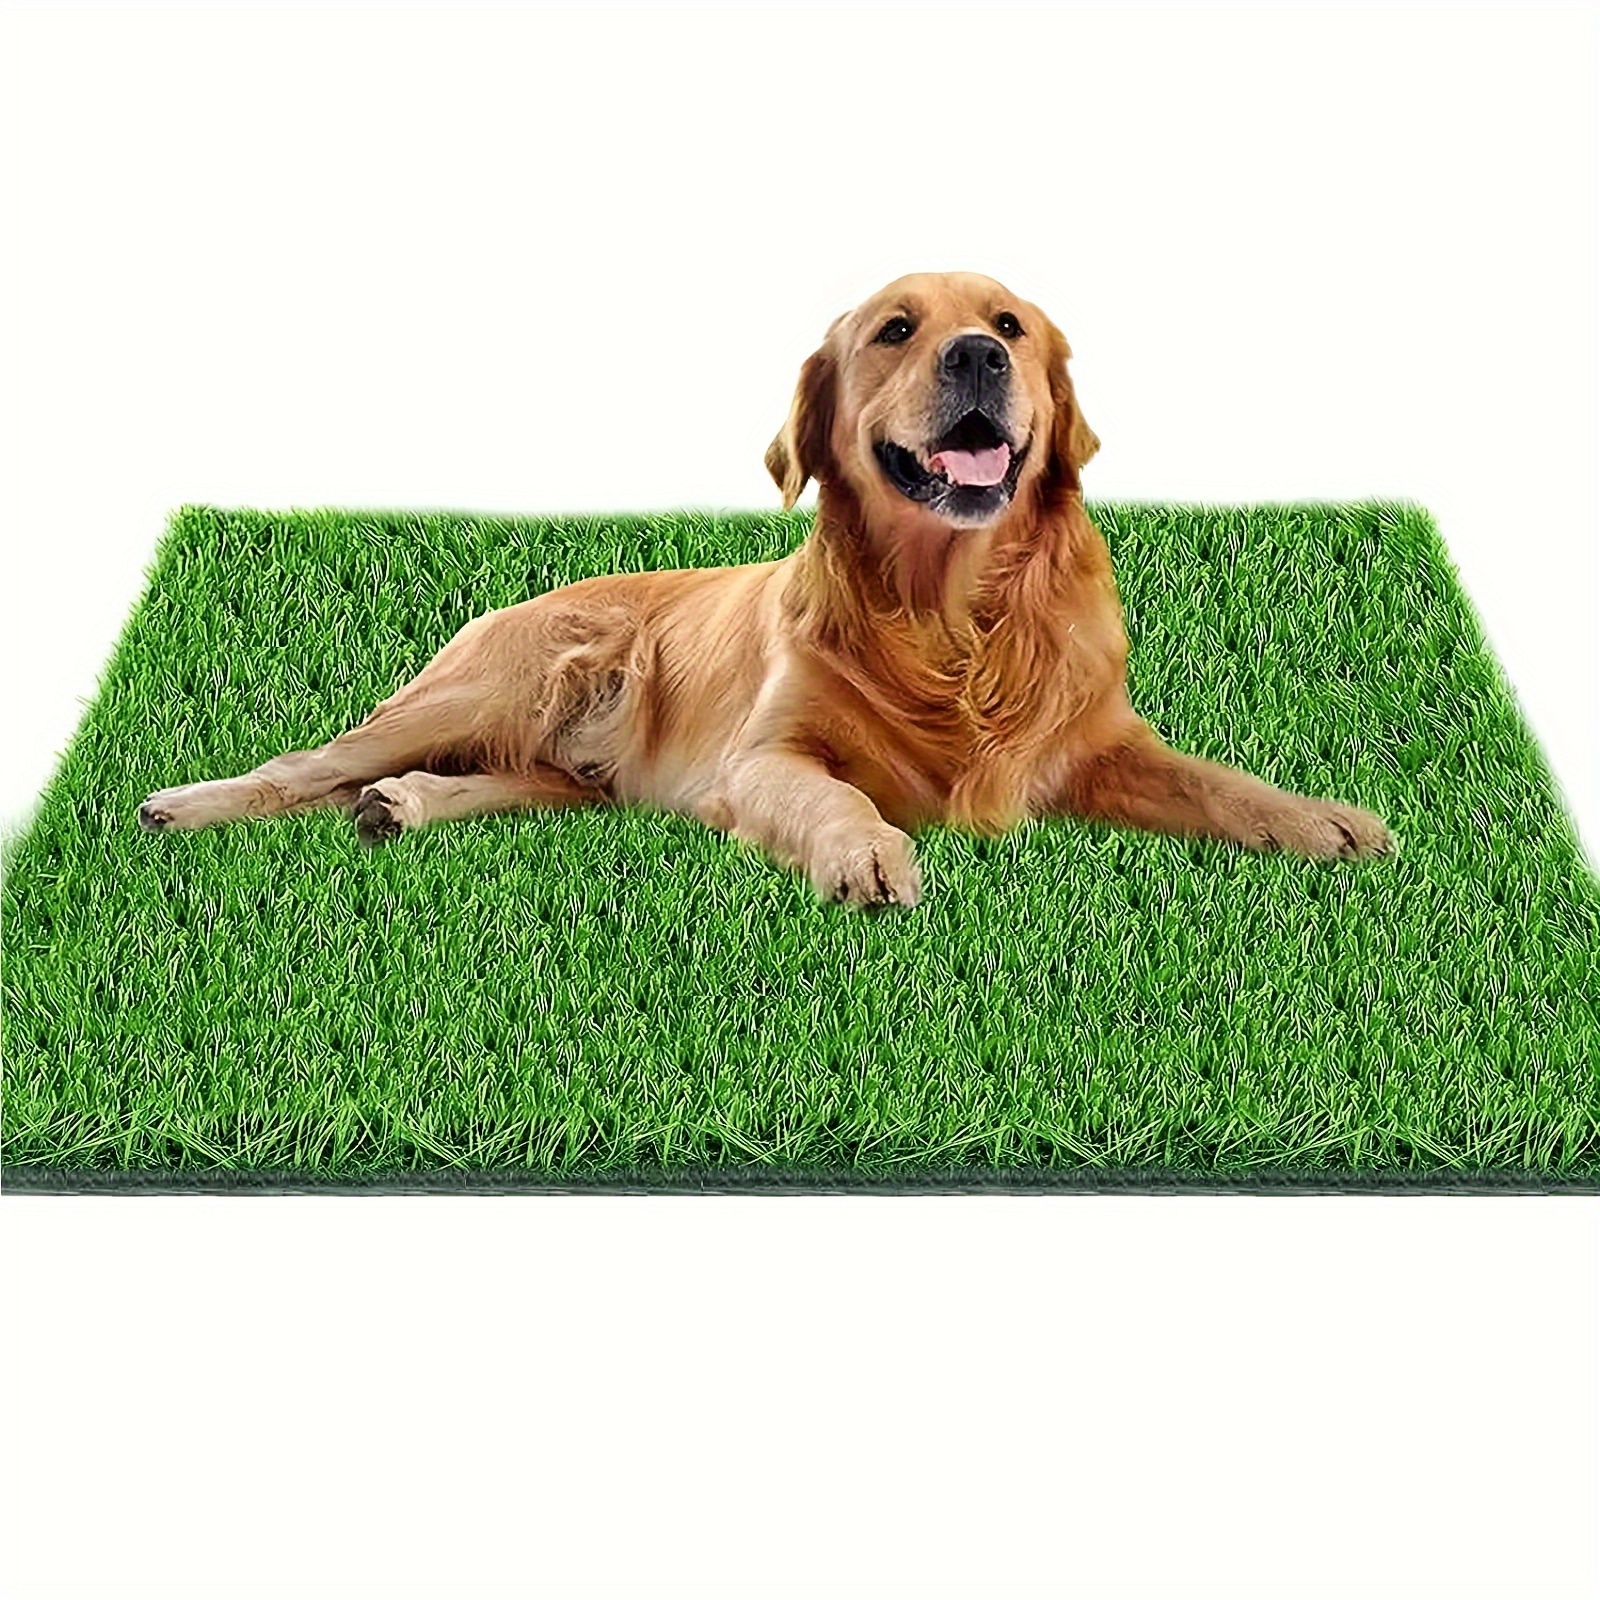 

Fortune-star Dog Pee Grass, 51.2in X 31.5in Dog Potty Grass, Artificial Grass For Dogs Suitable For Indoor/outdoor And Dog Potty Training (turf Dog Potty Easy To Clean And Use